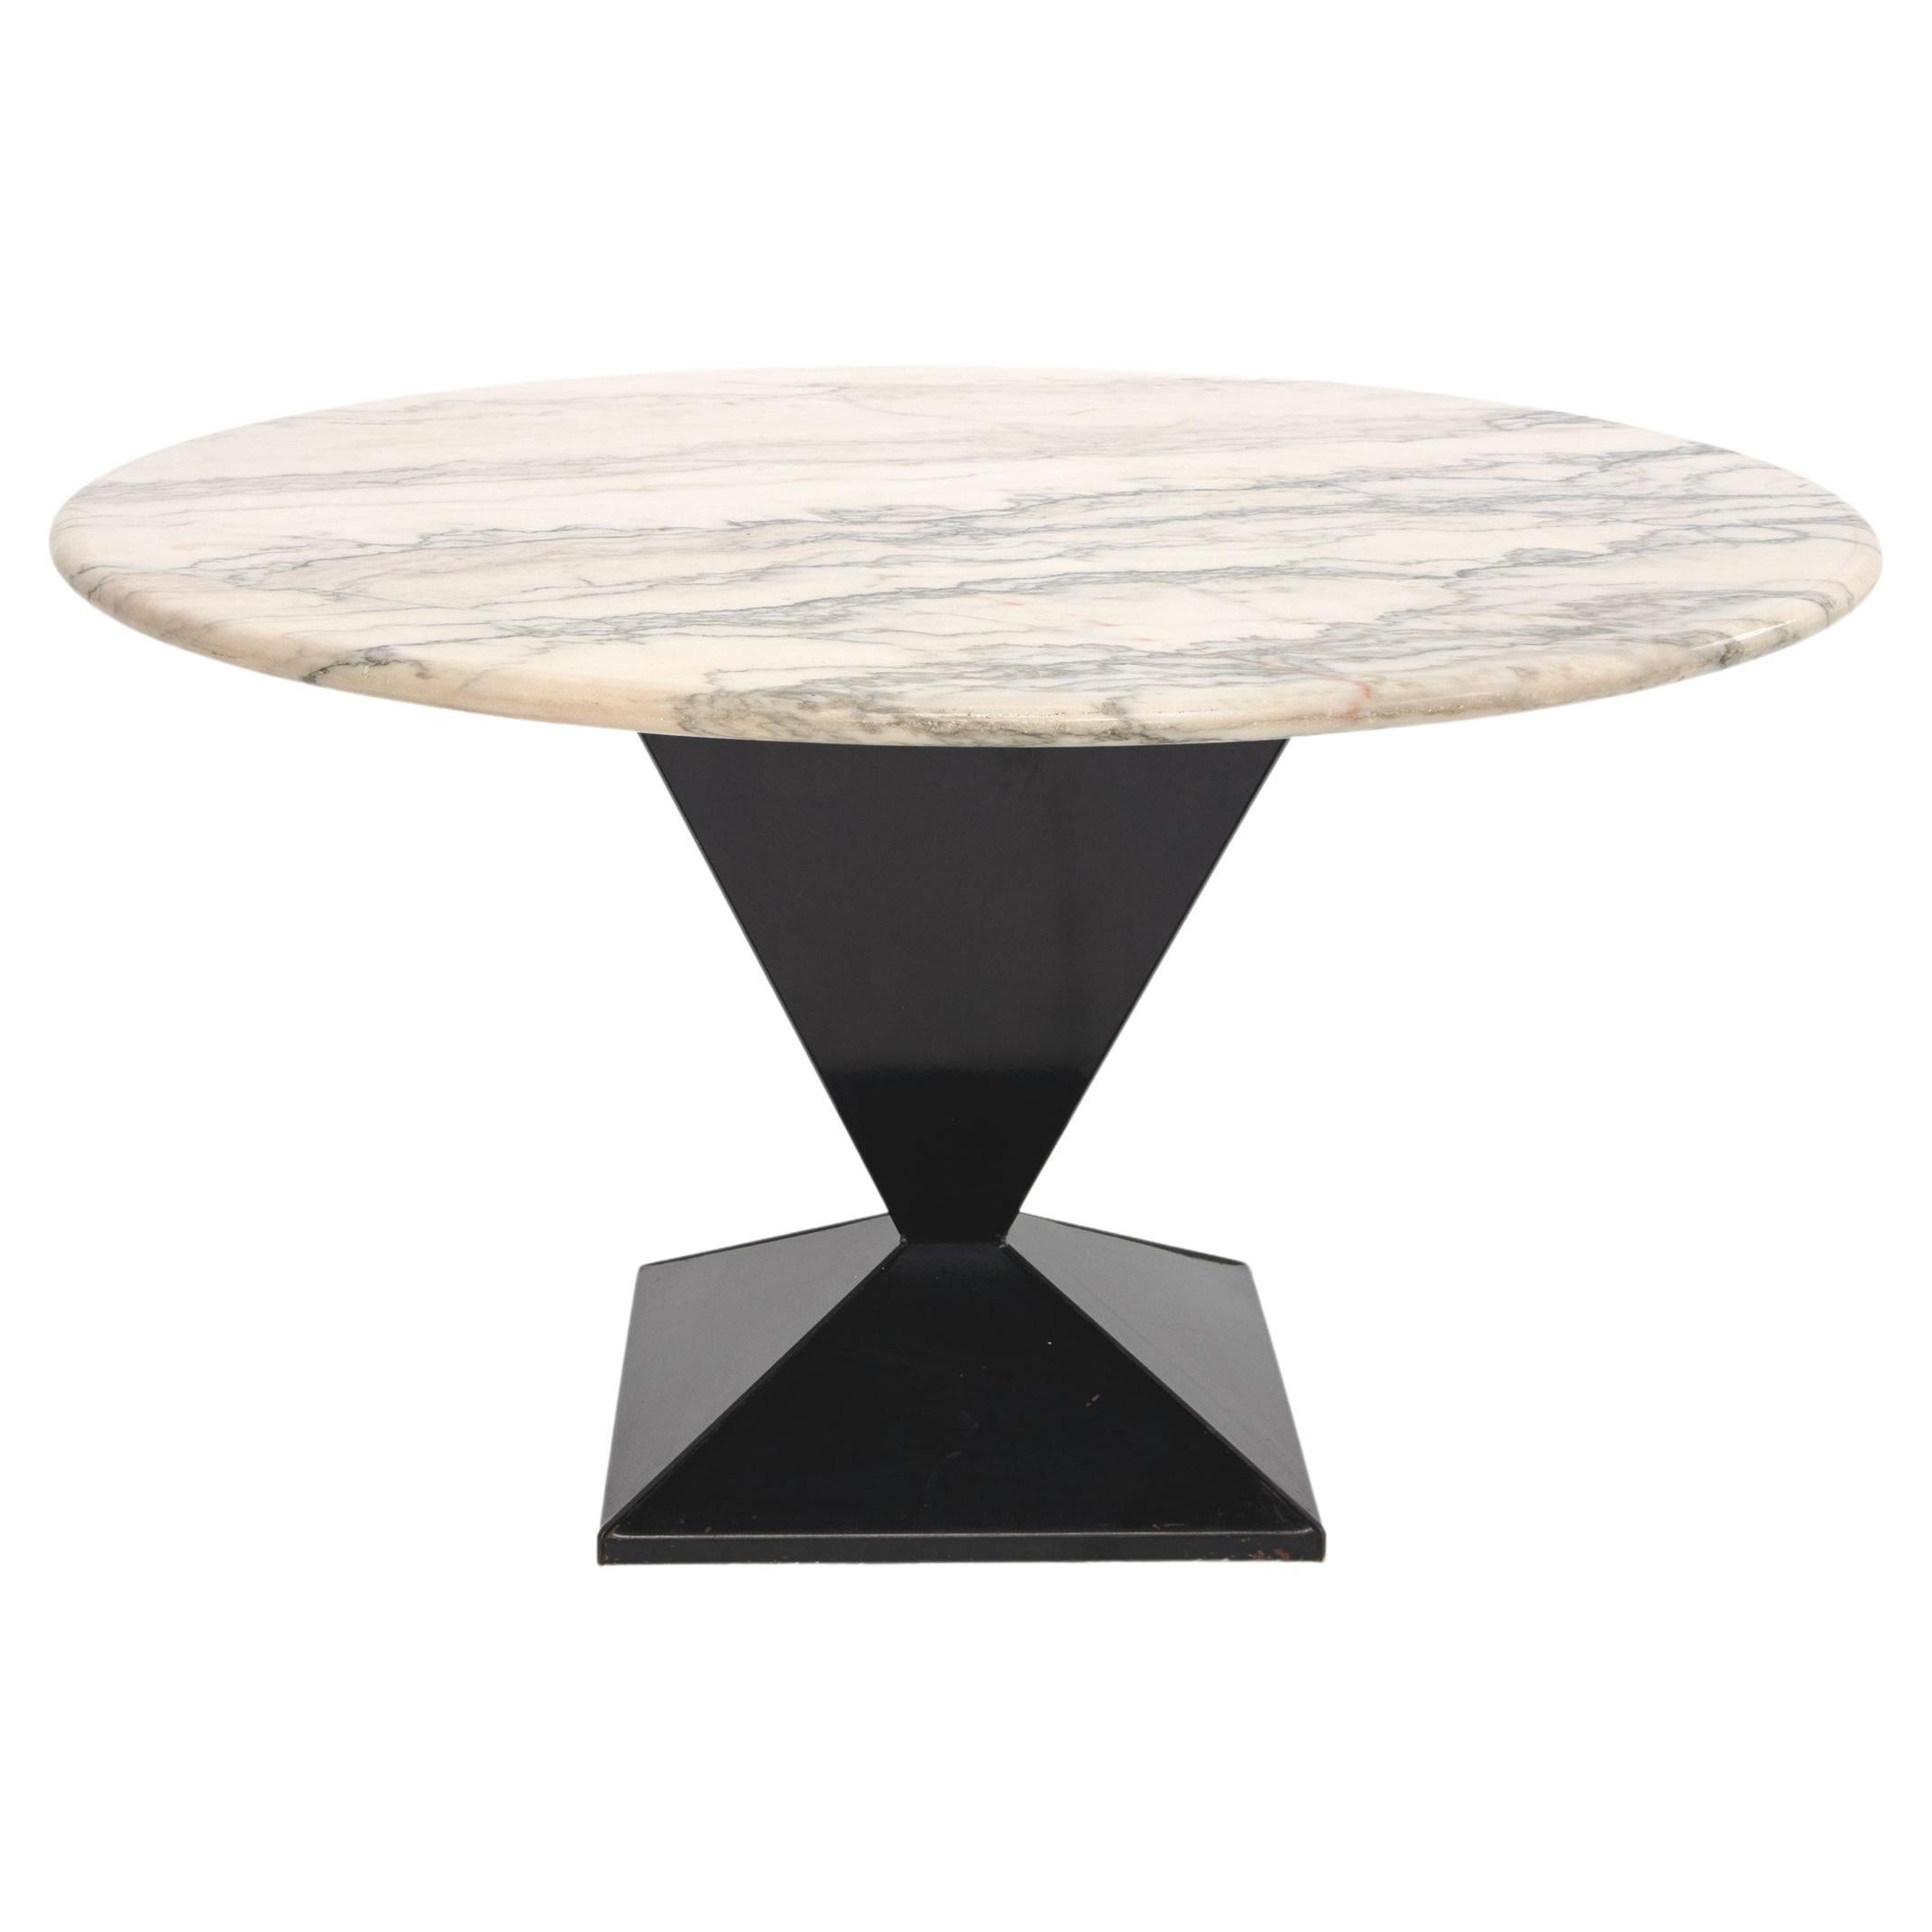 Vintage Calacatta Marble Dining Table For Sale